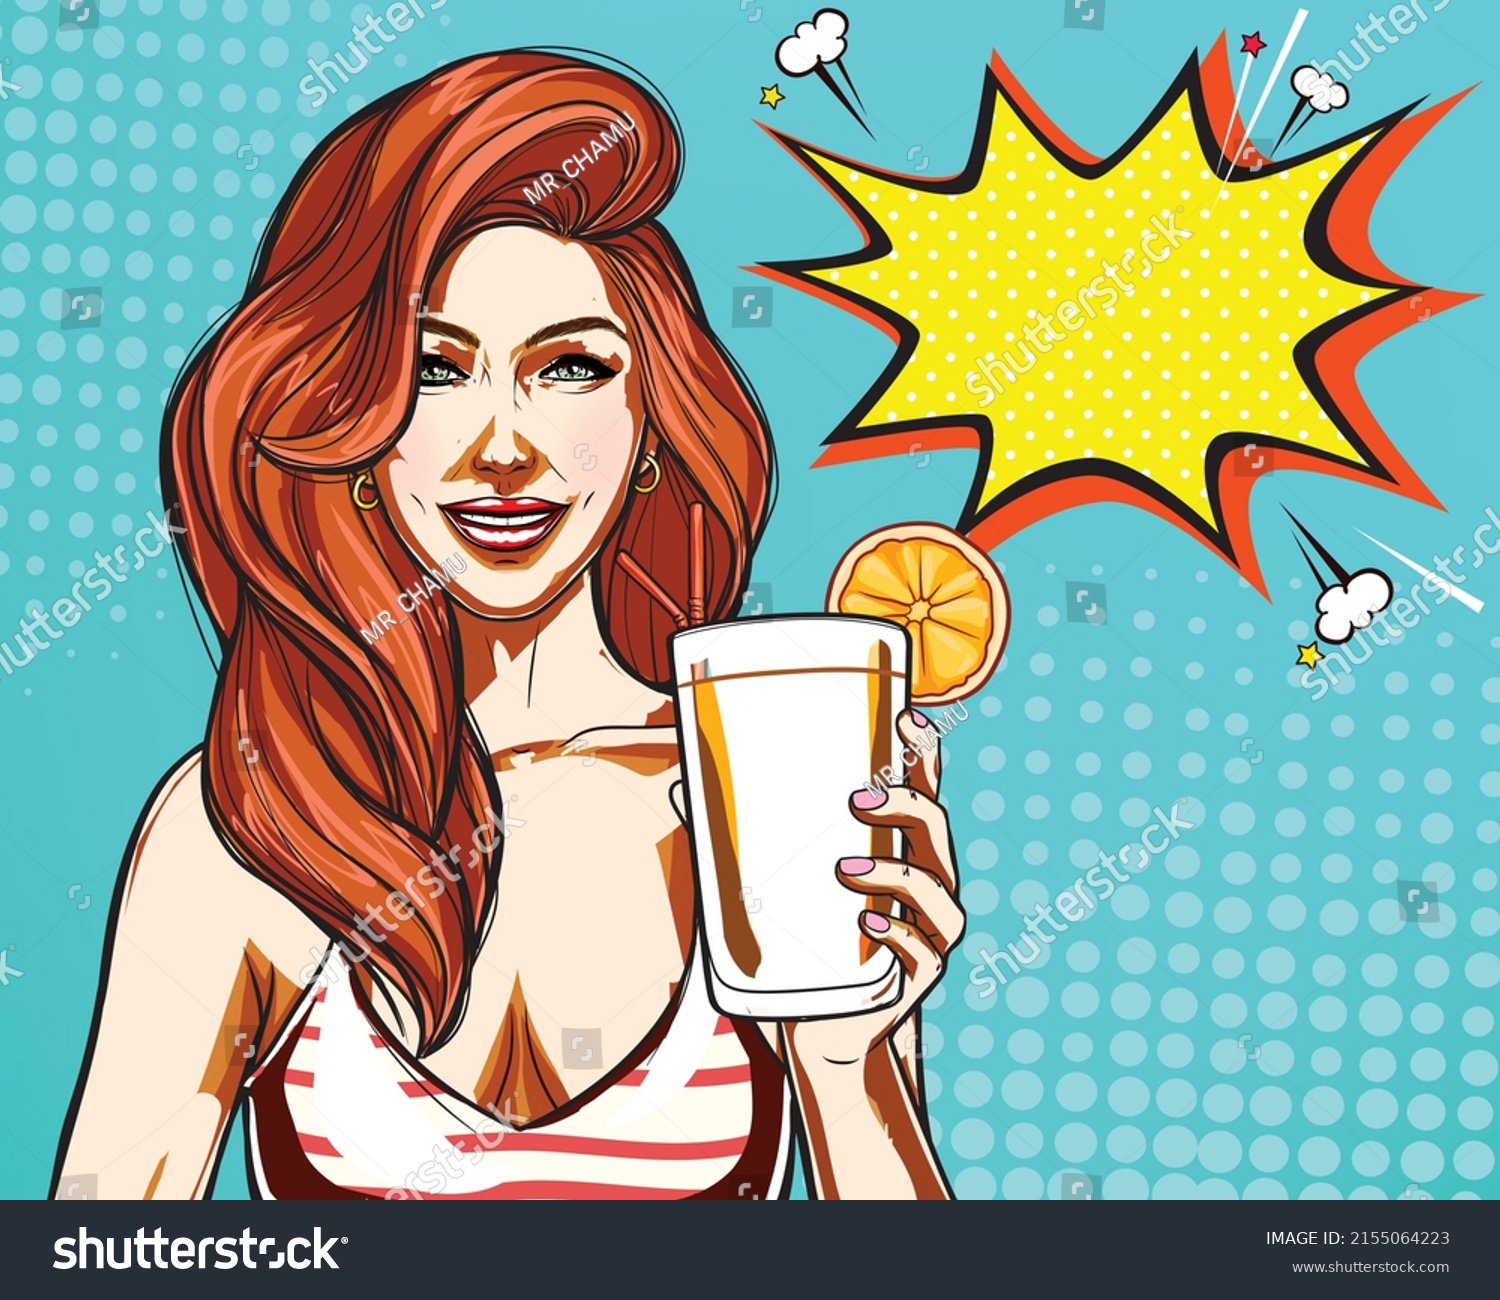 Sexy Pop Art Girl Red Hair Stock Vector (Royalty Free) 2155064223 ...